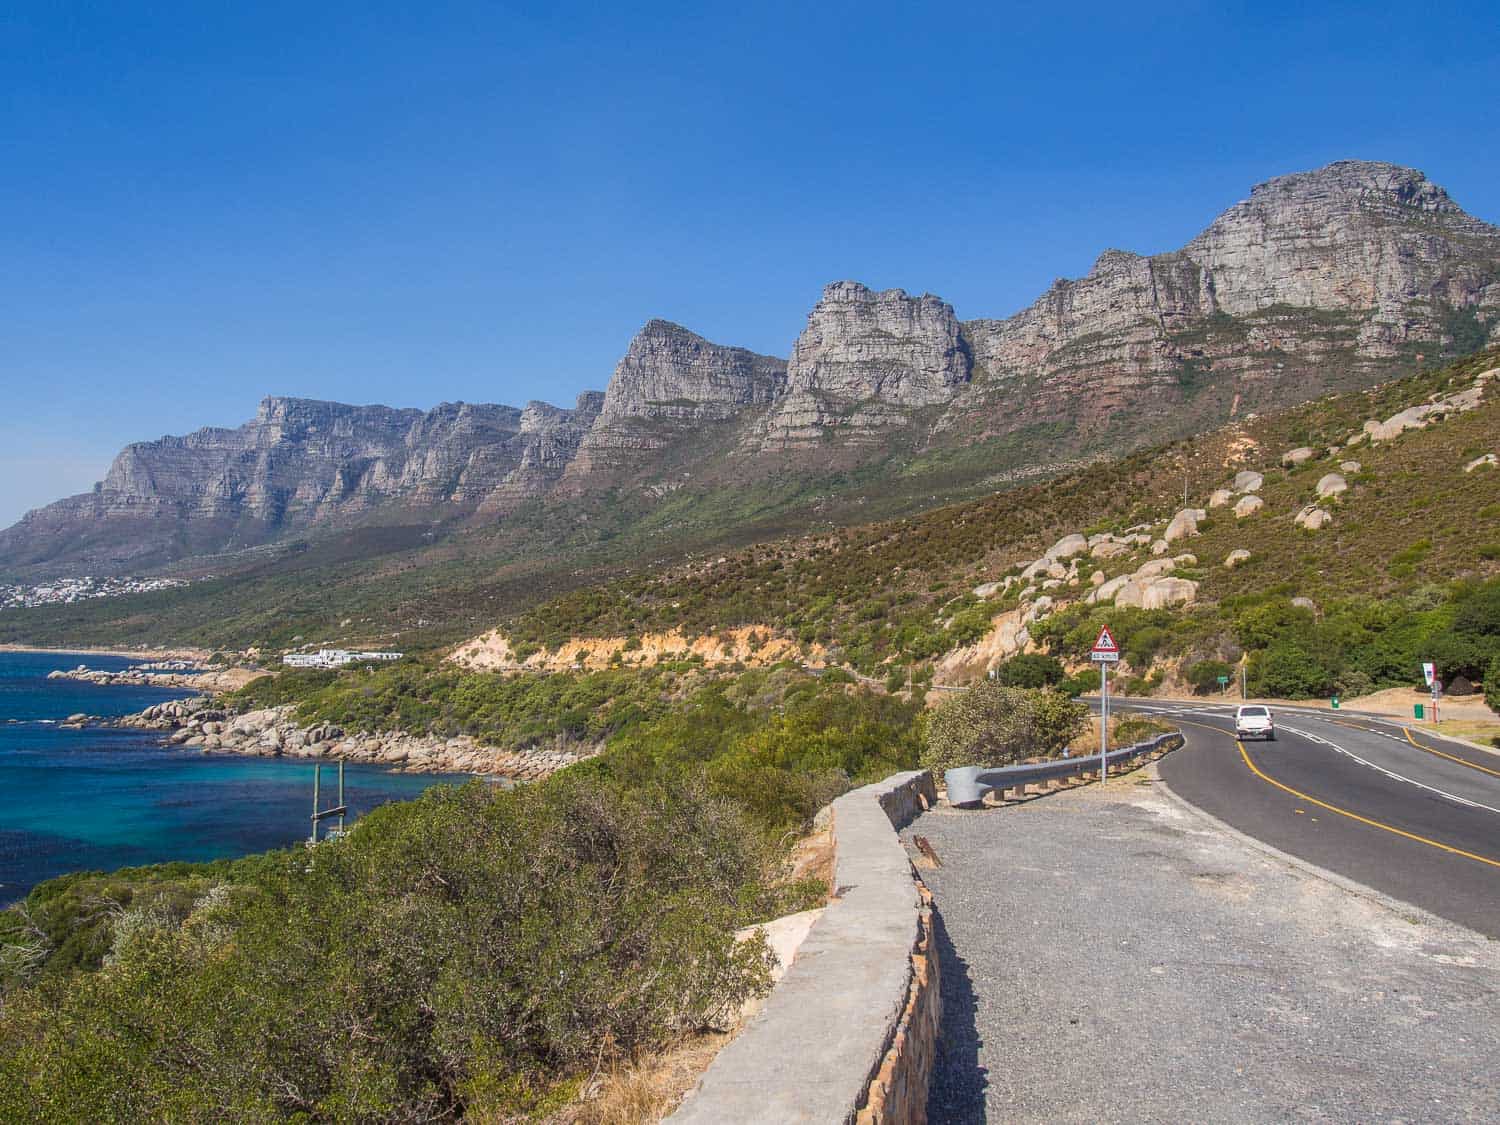 Victoria Road on the way to Camp's Bay with a view of the Twelve Apostles mountains